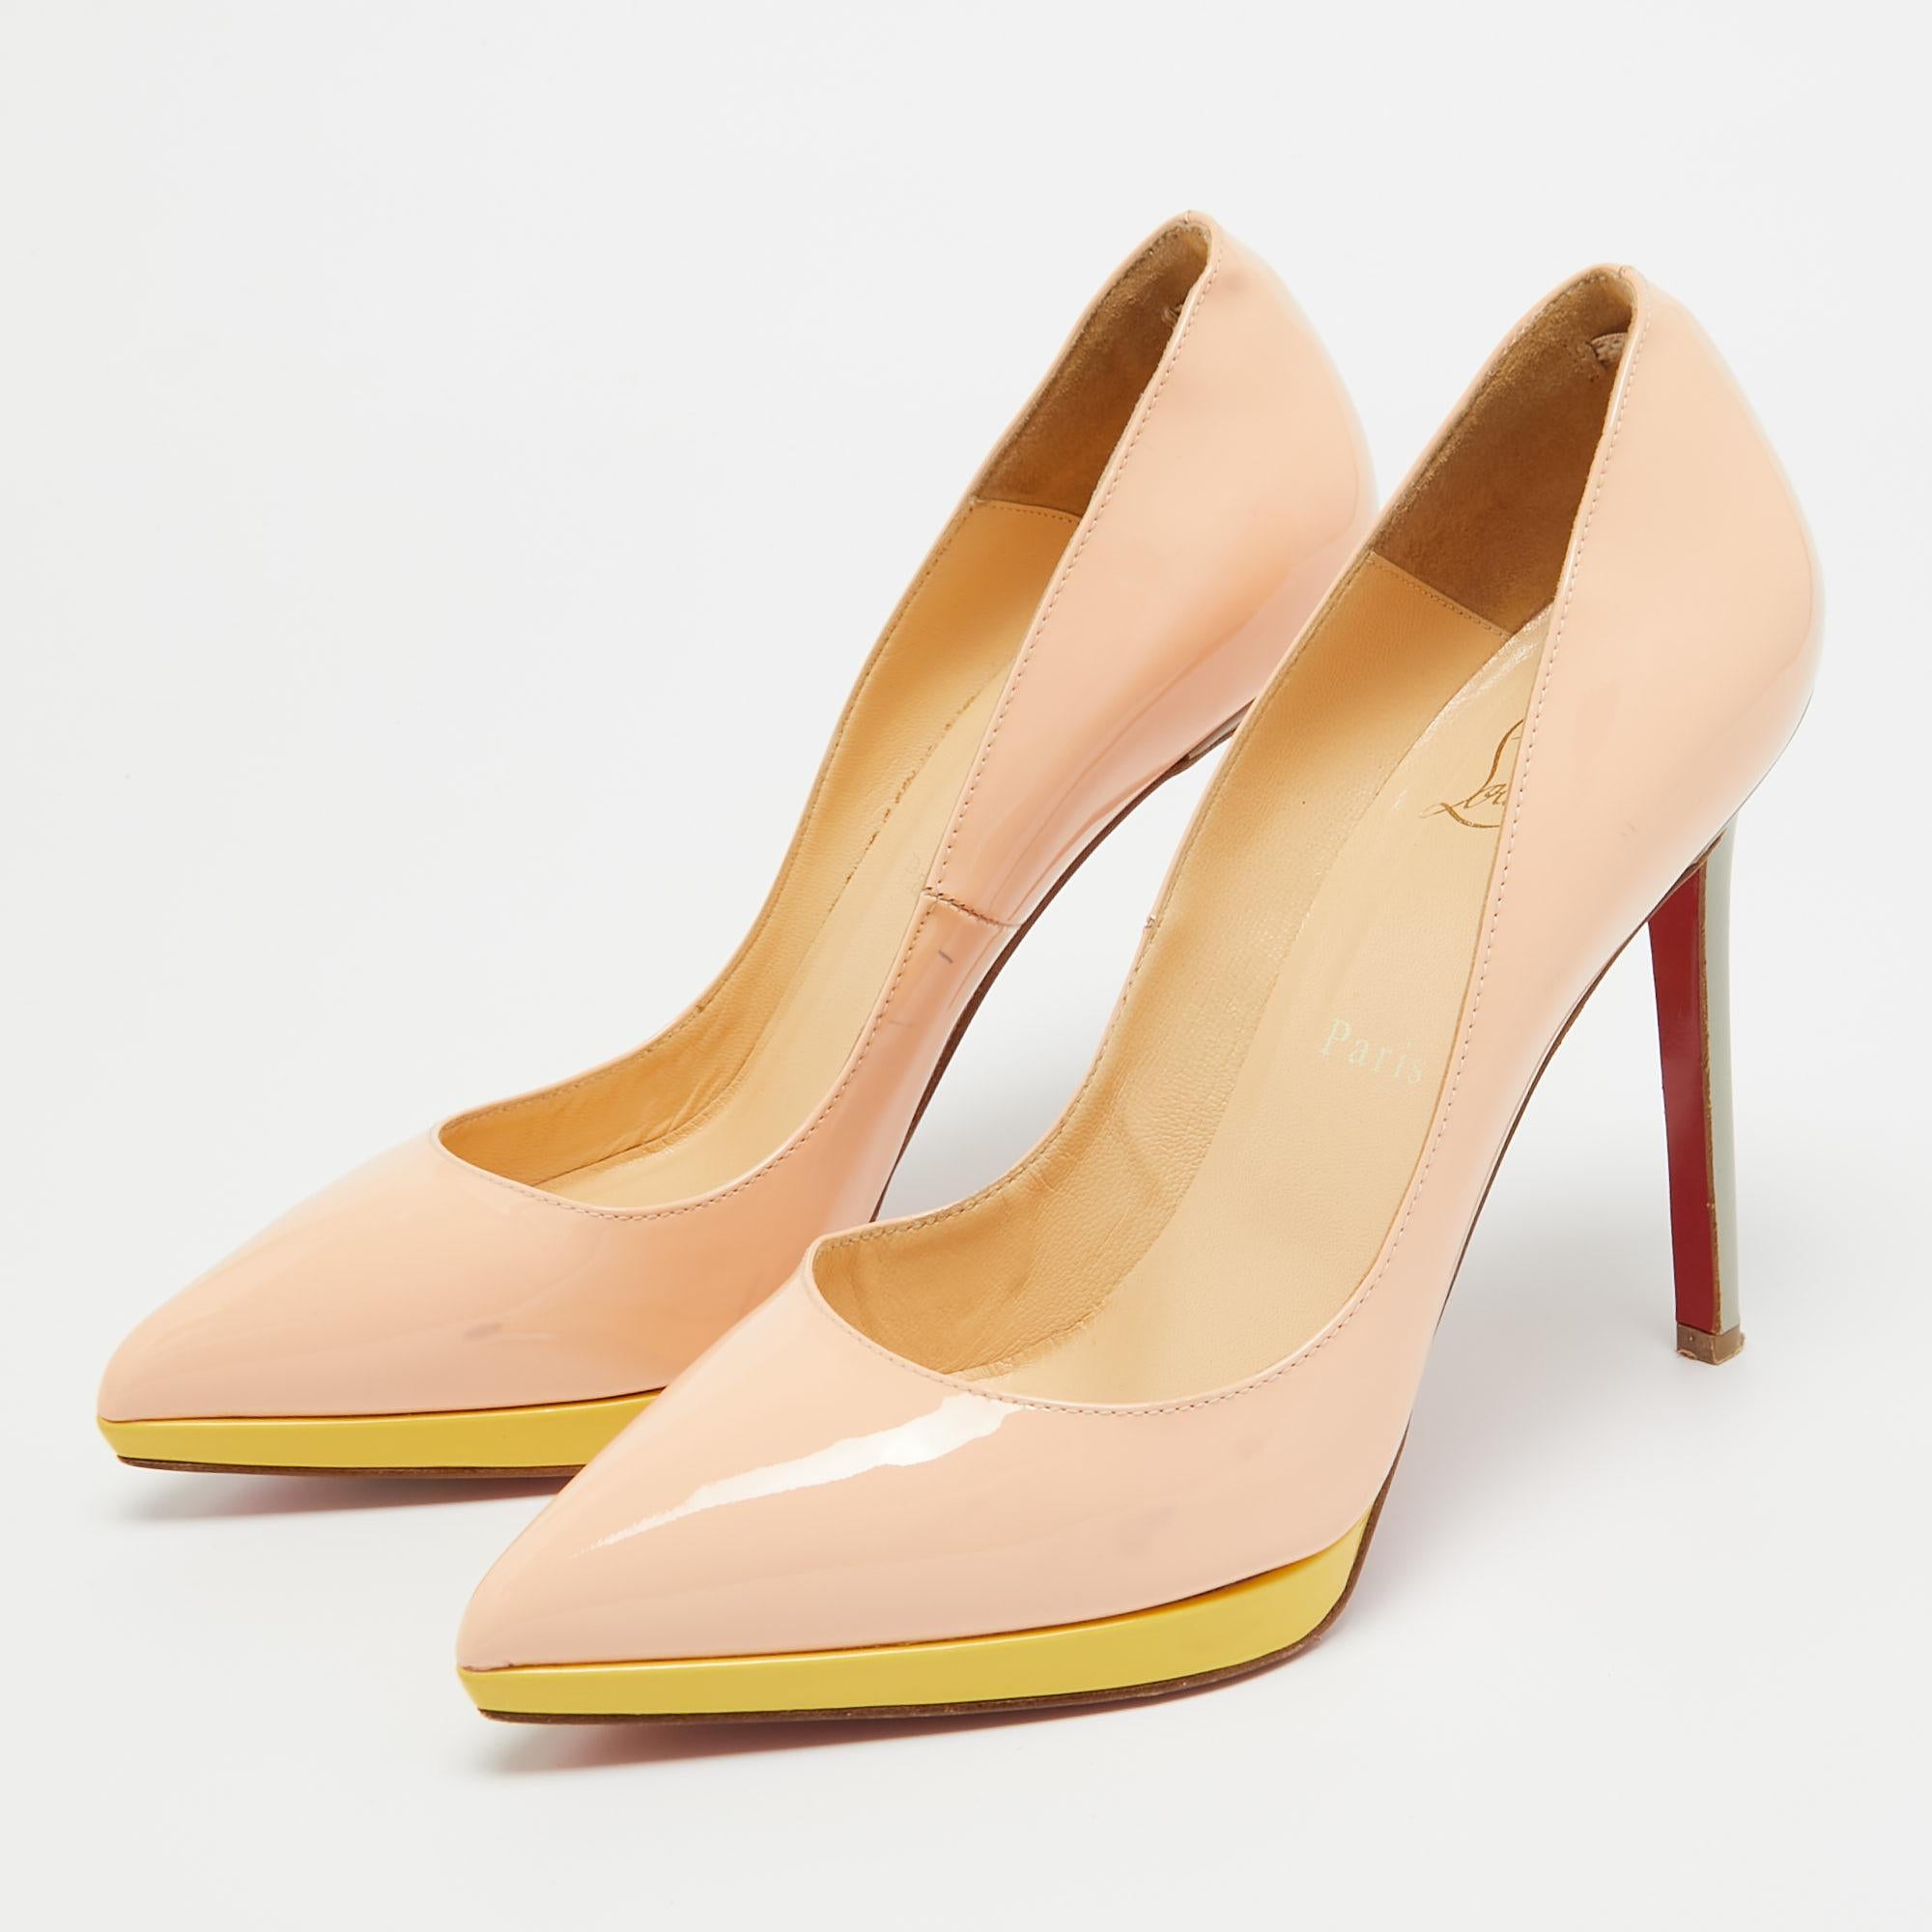 Christian Louboutin Peach Pink Patent Leather Pigalle Plato Pumps Size 38.5 For Sale 3